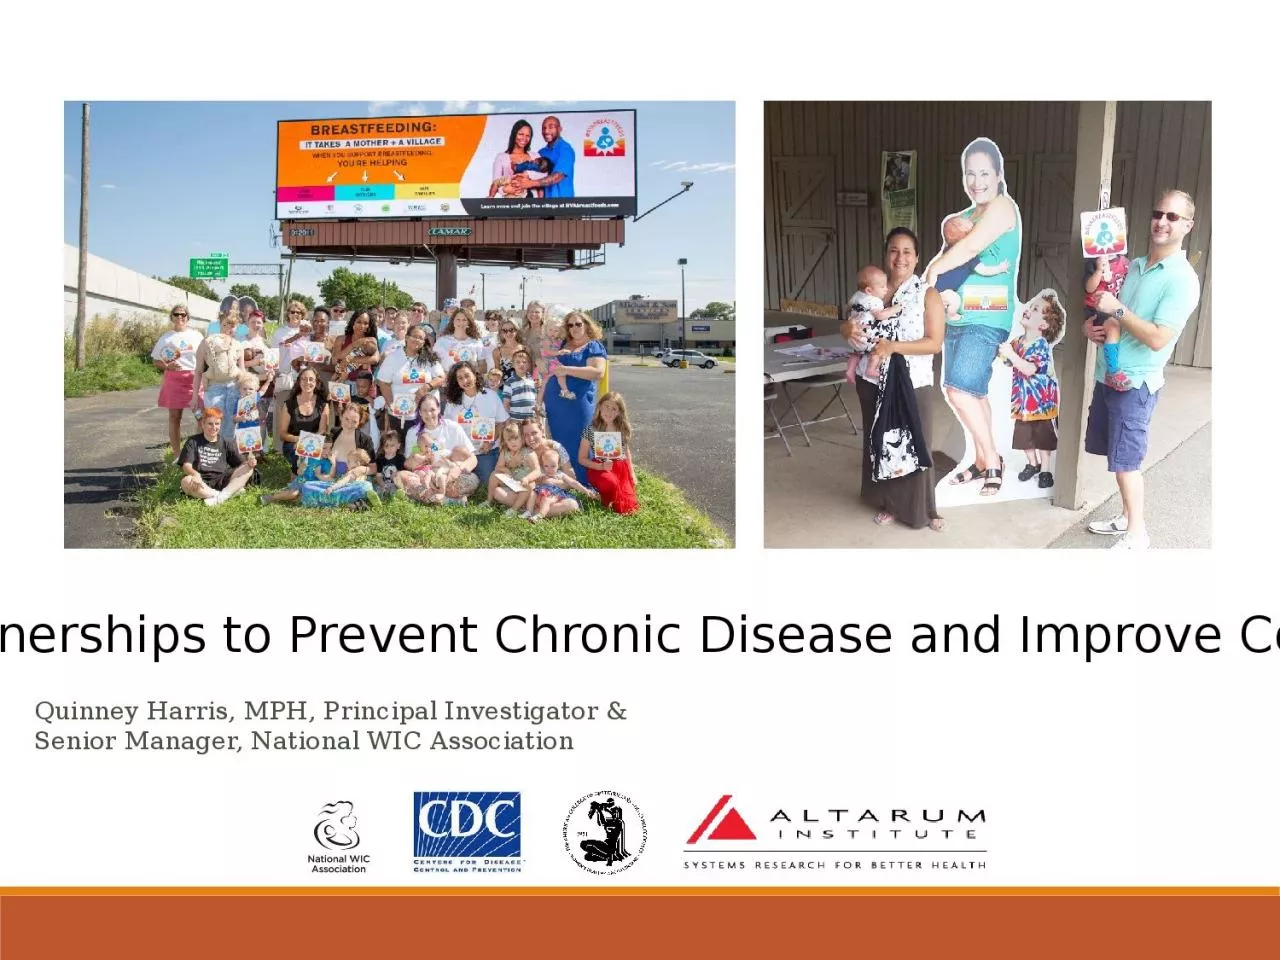 The Power of Partnerships to Prevent Chronic Disease and Improve Community Health